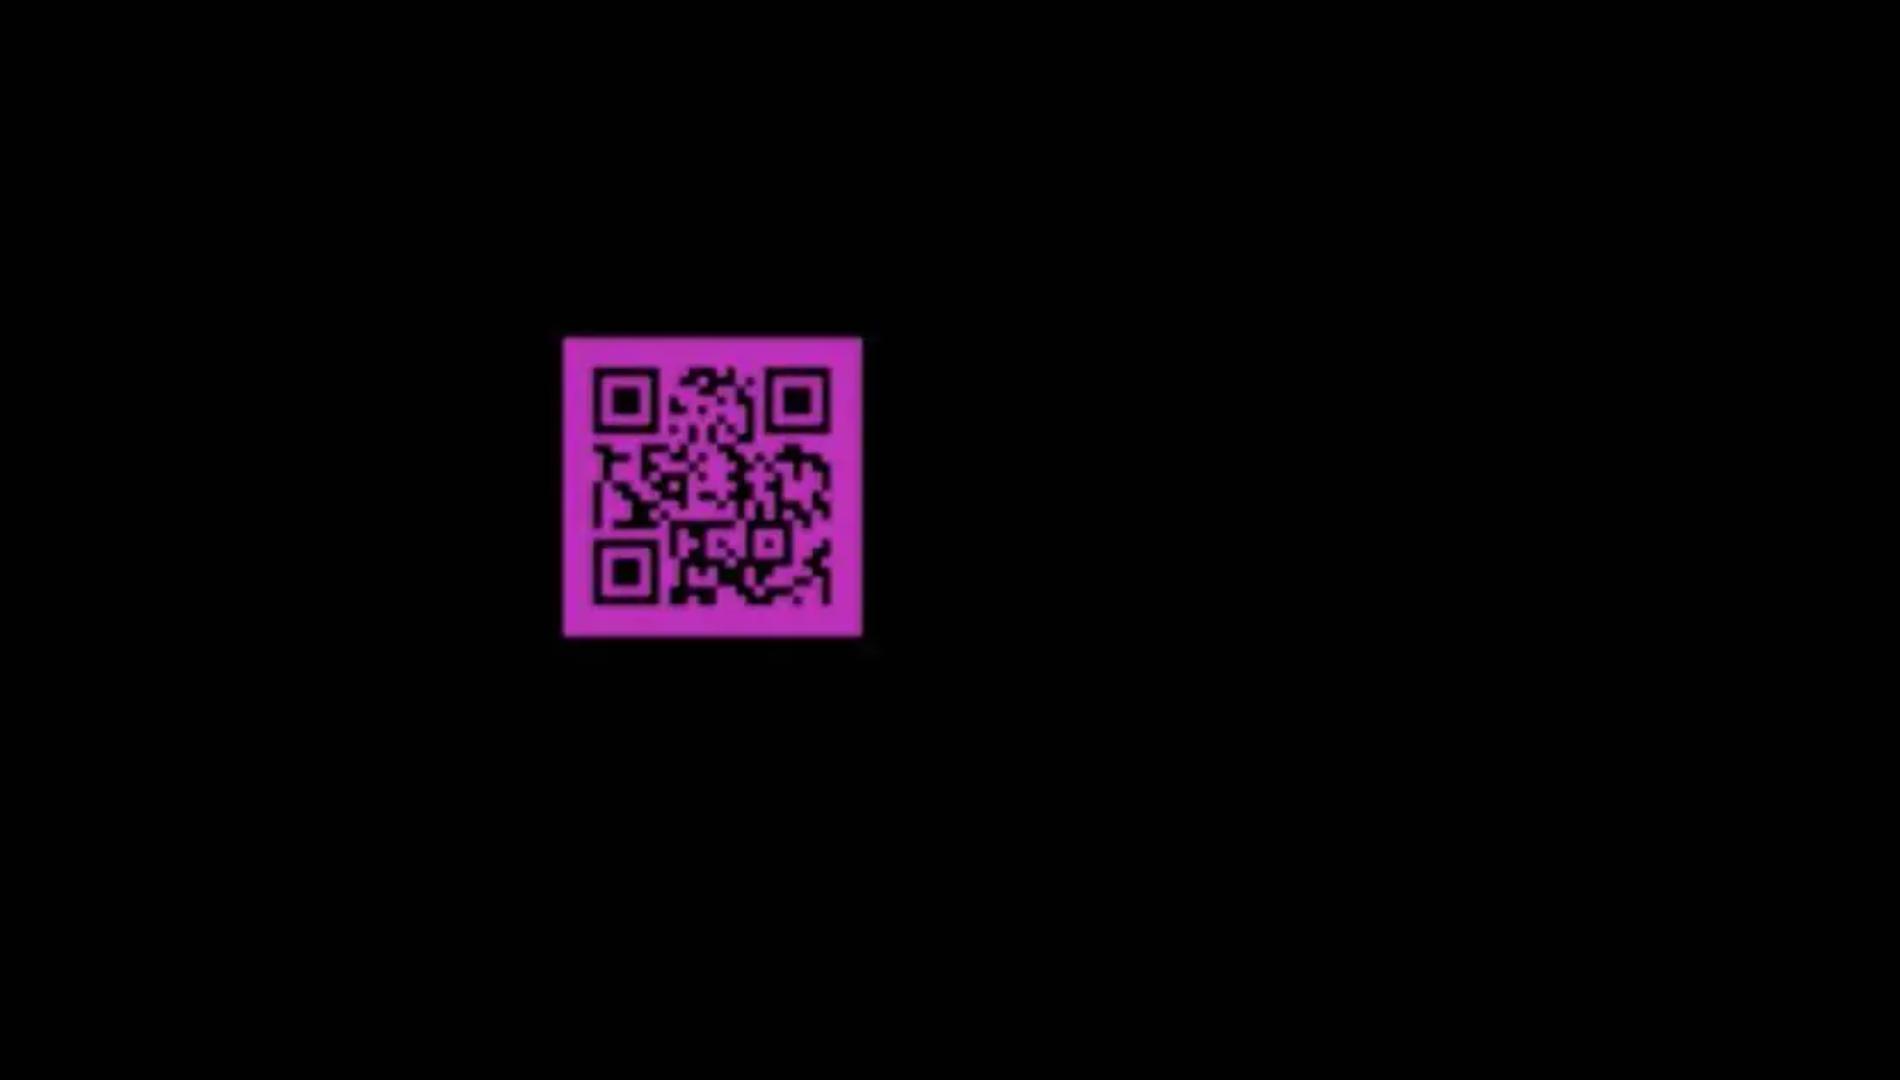 How QR Codes Make Information More Accessible